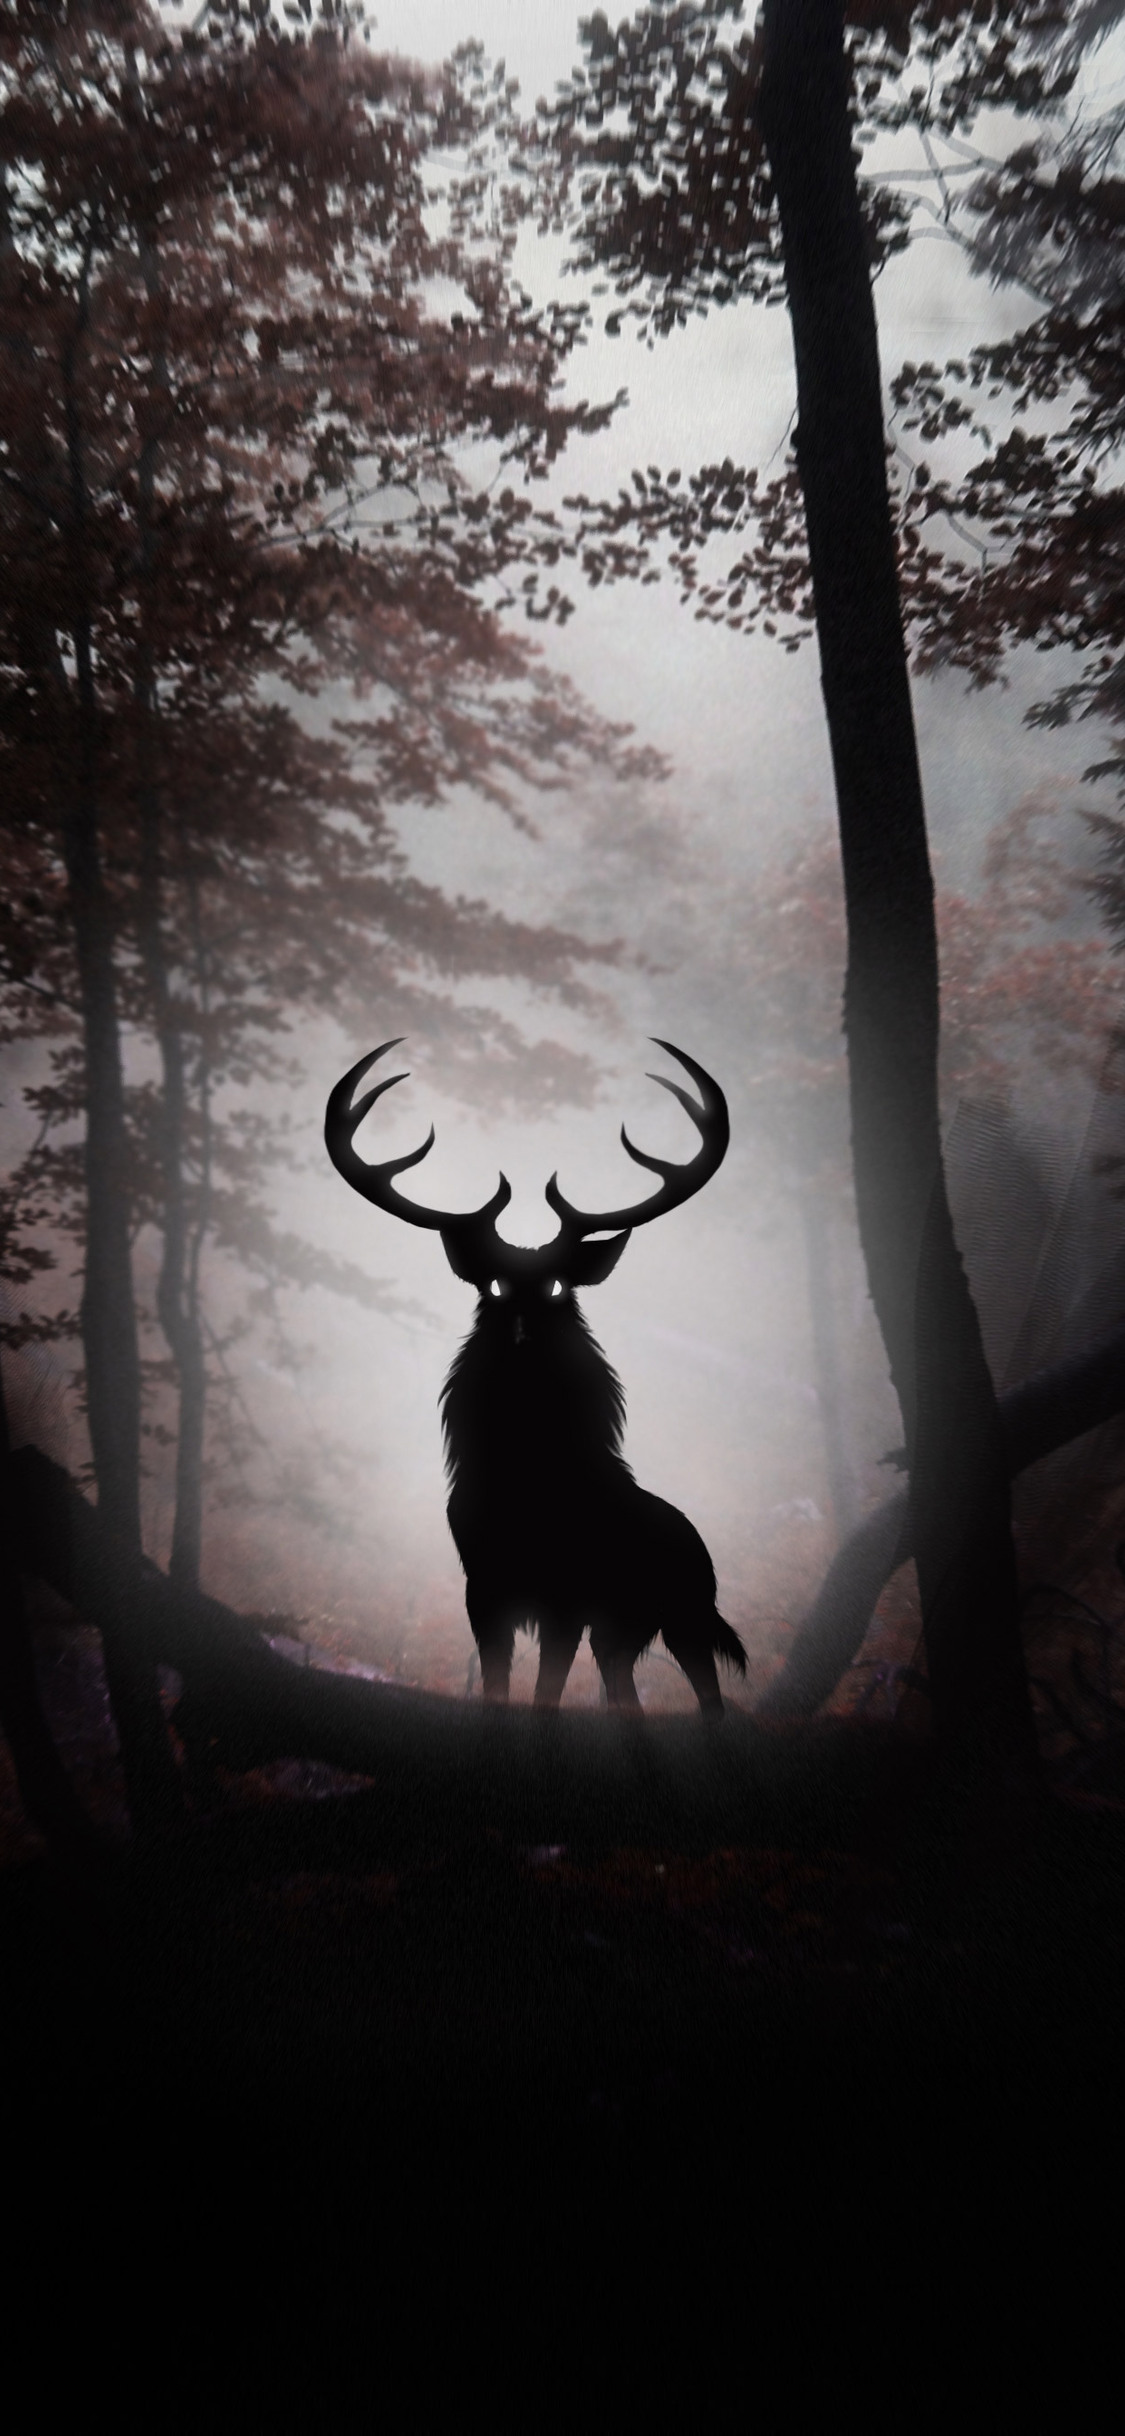 Deer Fantasy Artwork 4k iPhone XS, iPhone iPhone X HD 4k Wallpaper, Image, Background, Photo and Picture